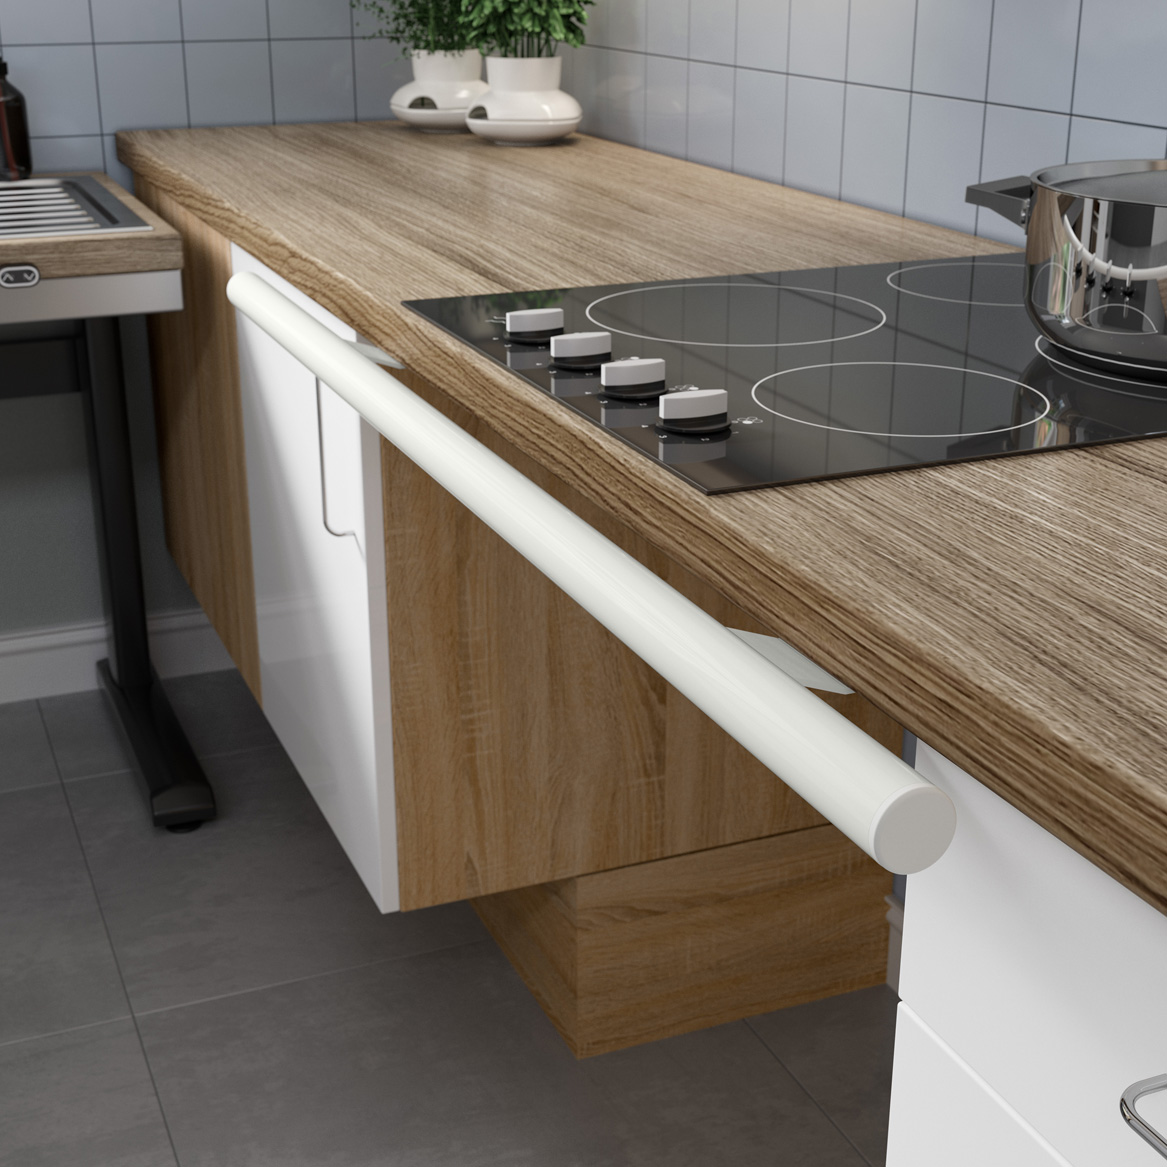 AKW helps make kitchens safer thanks to new Grab-a-Rail